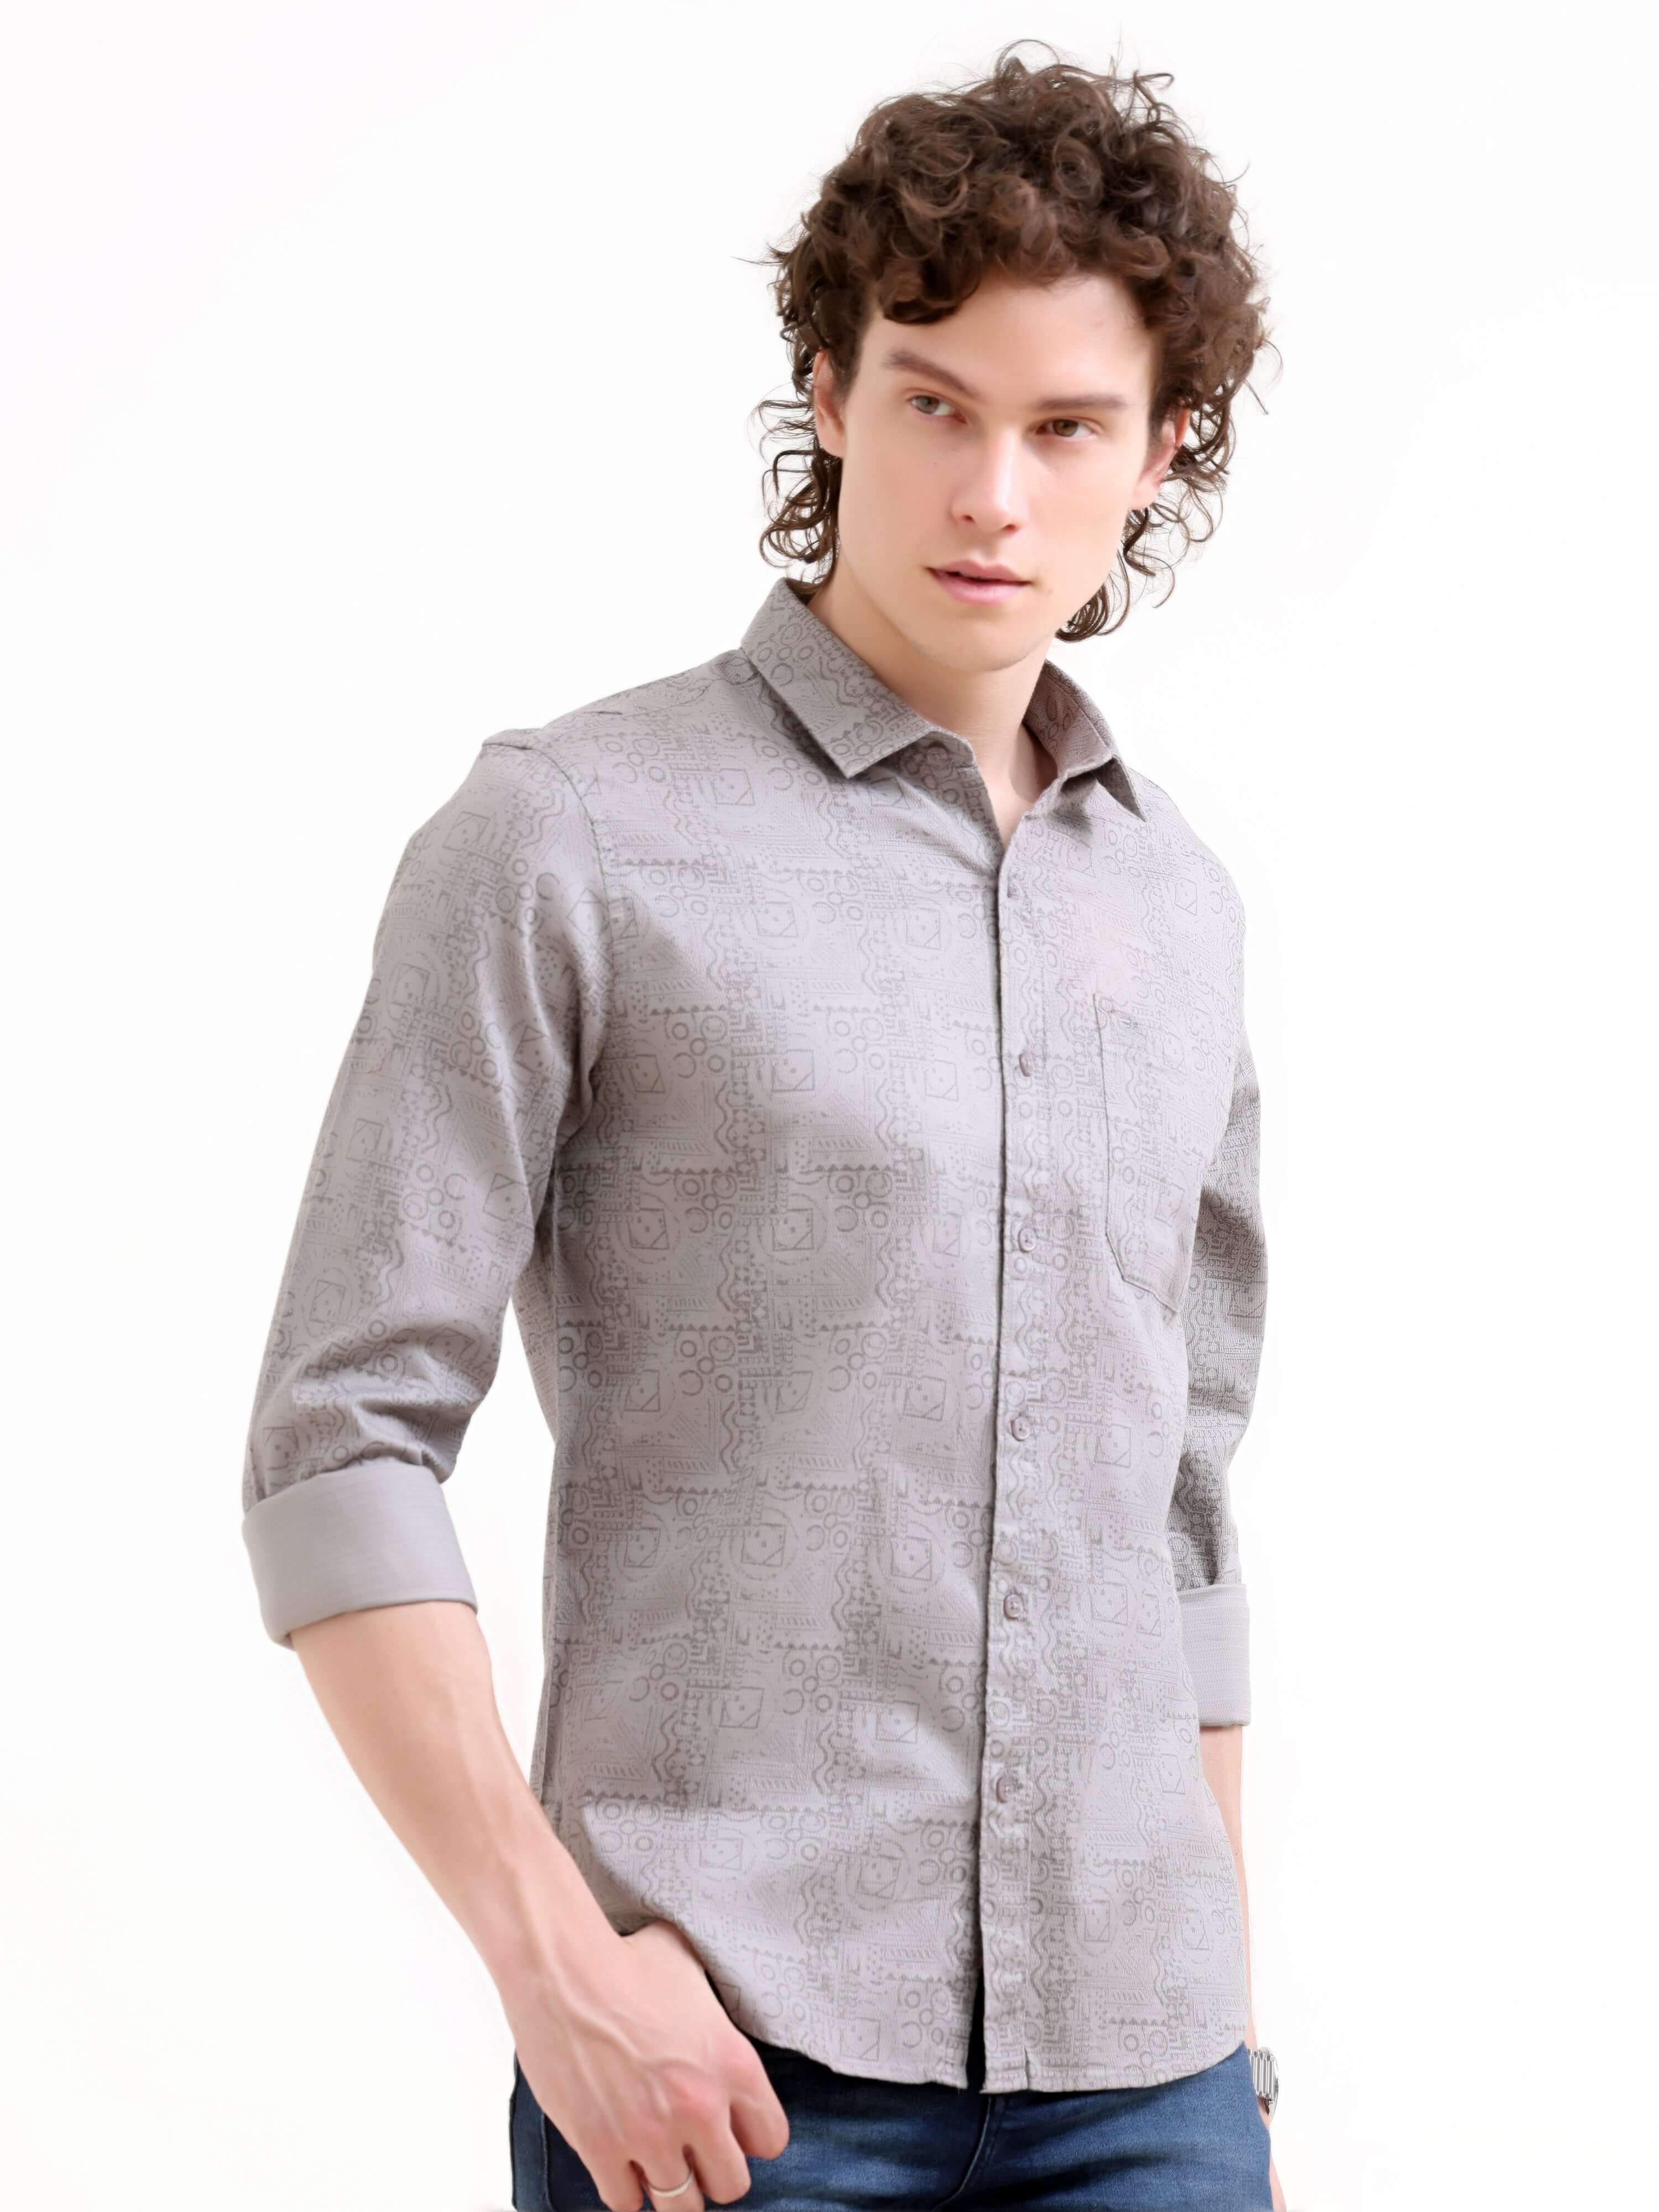 Misa Trib Floral Shirt - New Men's Summer Casual Wear shop online at Estilocus. Shop the latest Misa Trib floral-printed gray shirt for a perfect blend of summer style & casual elegance. 100% Cotton. New arrival!